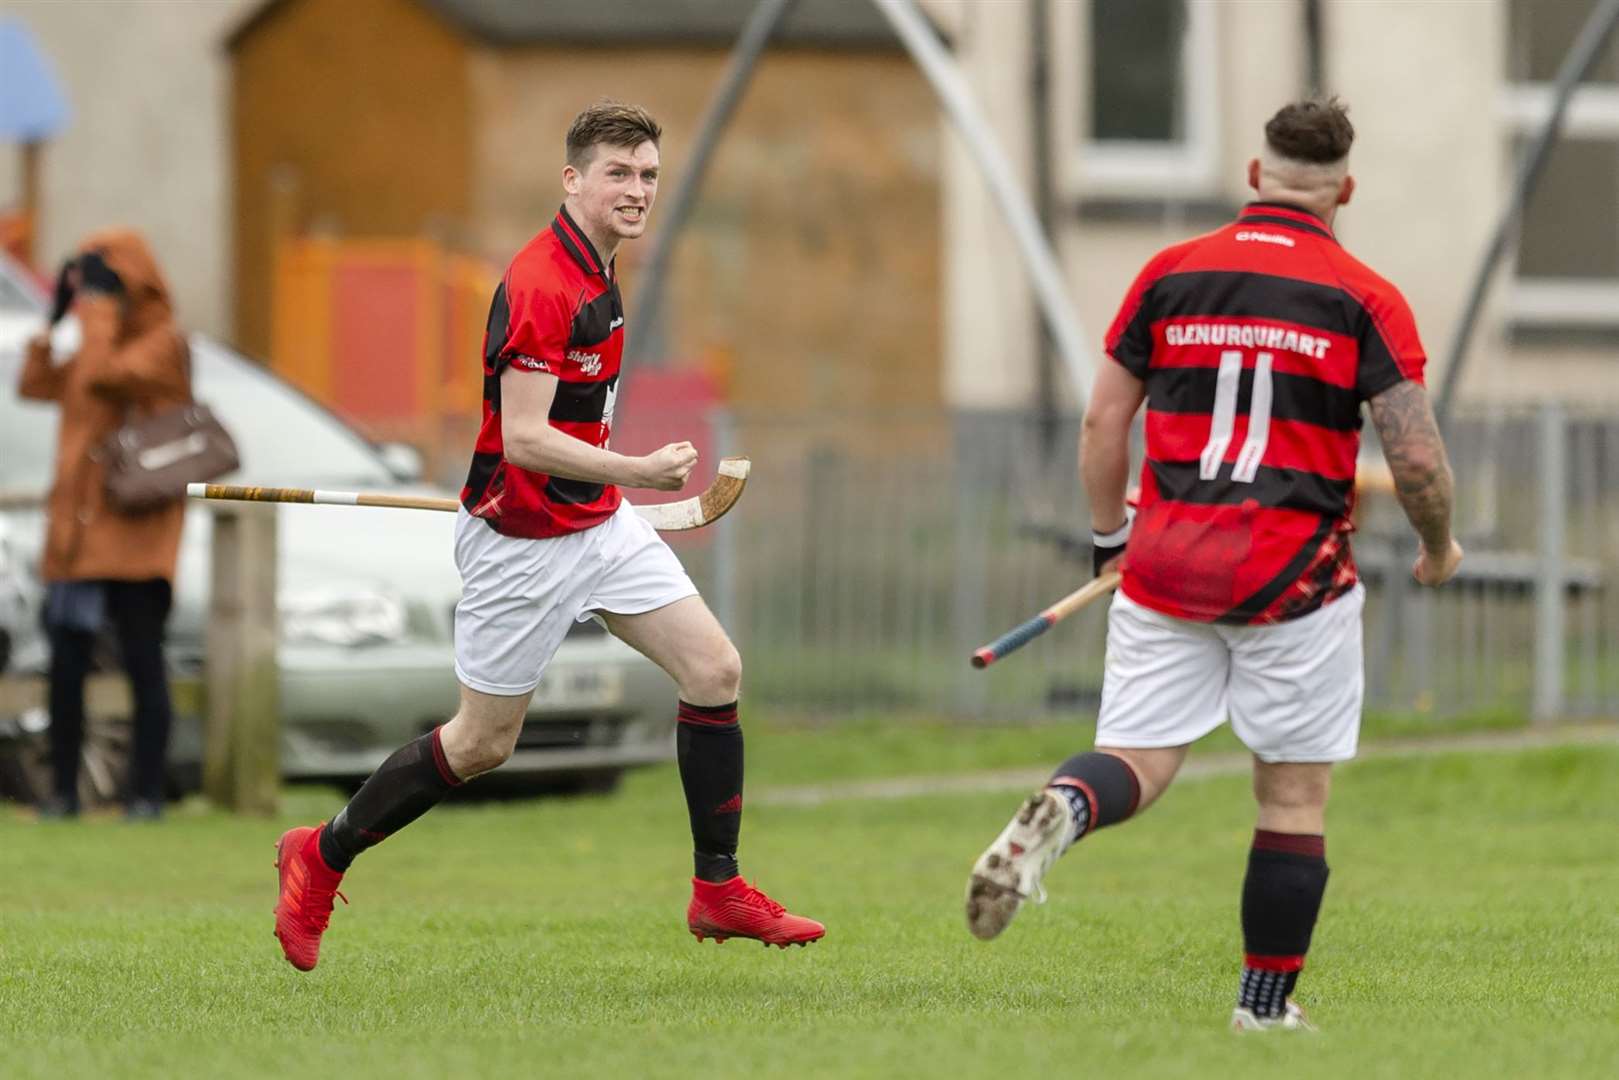 Glenurquhart thought they won the shinty hurling clash in Ireland. But so did Bandon.